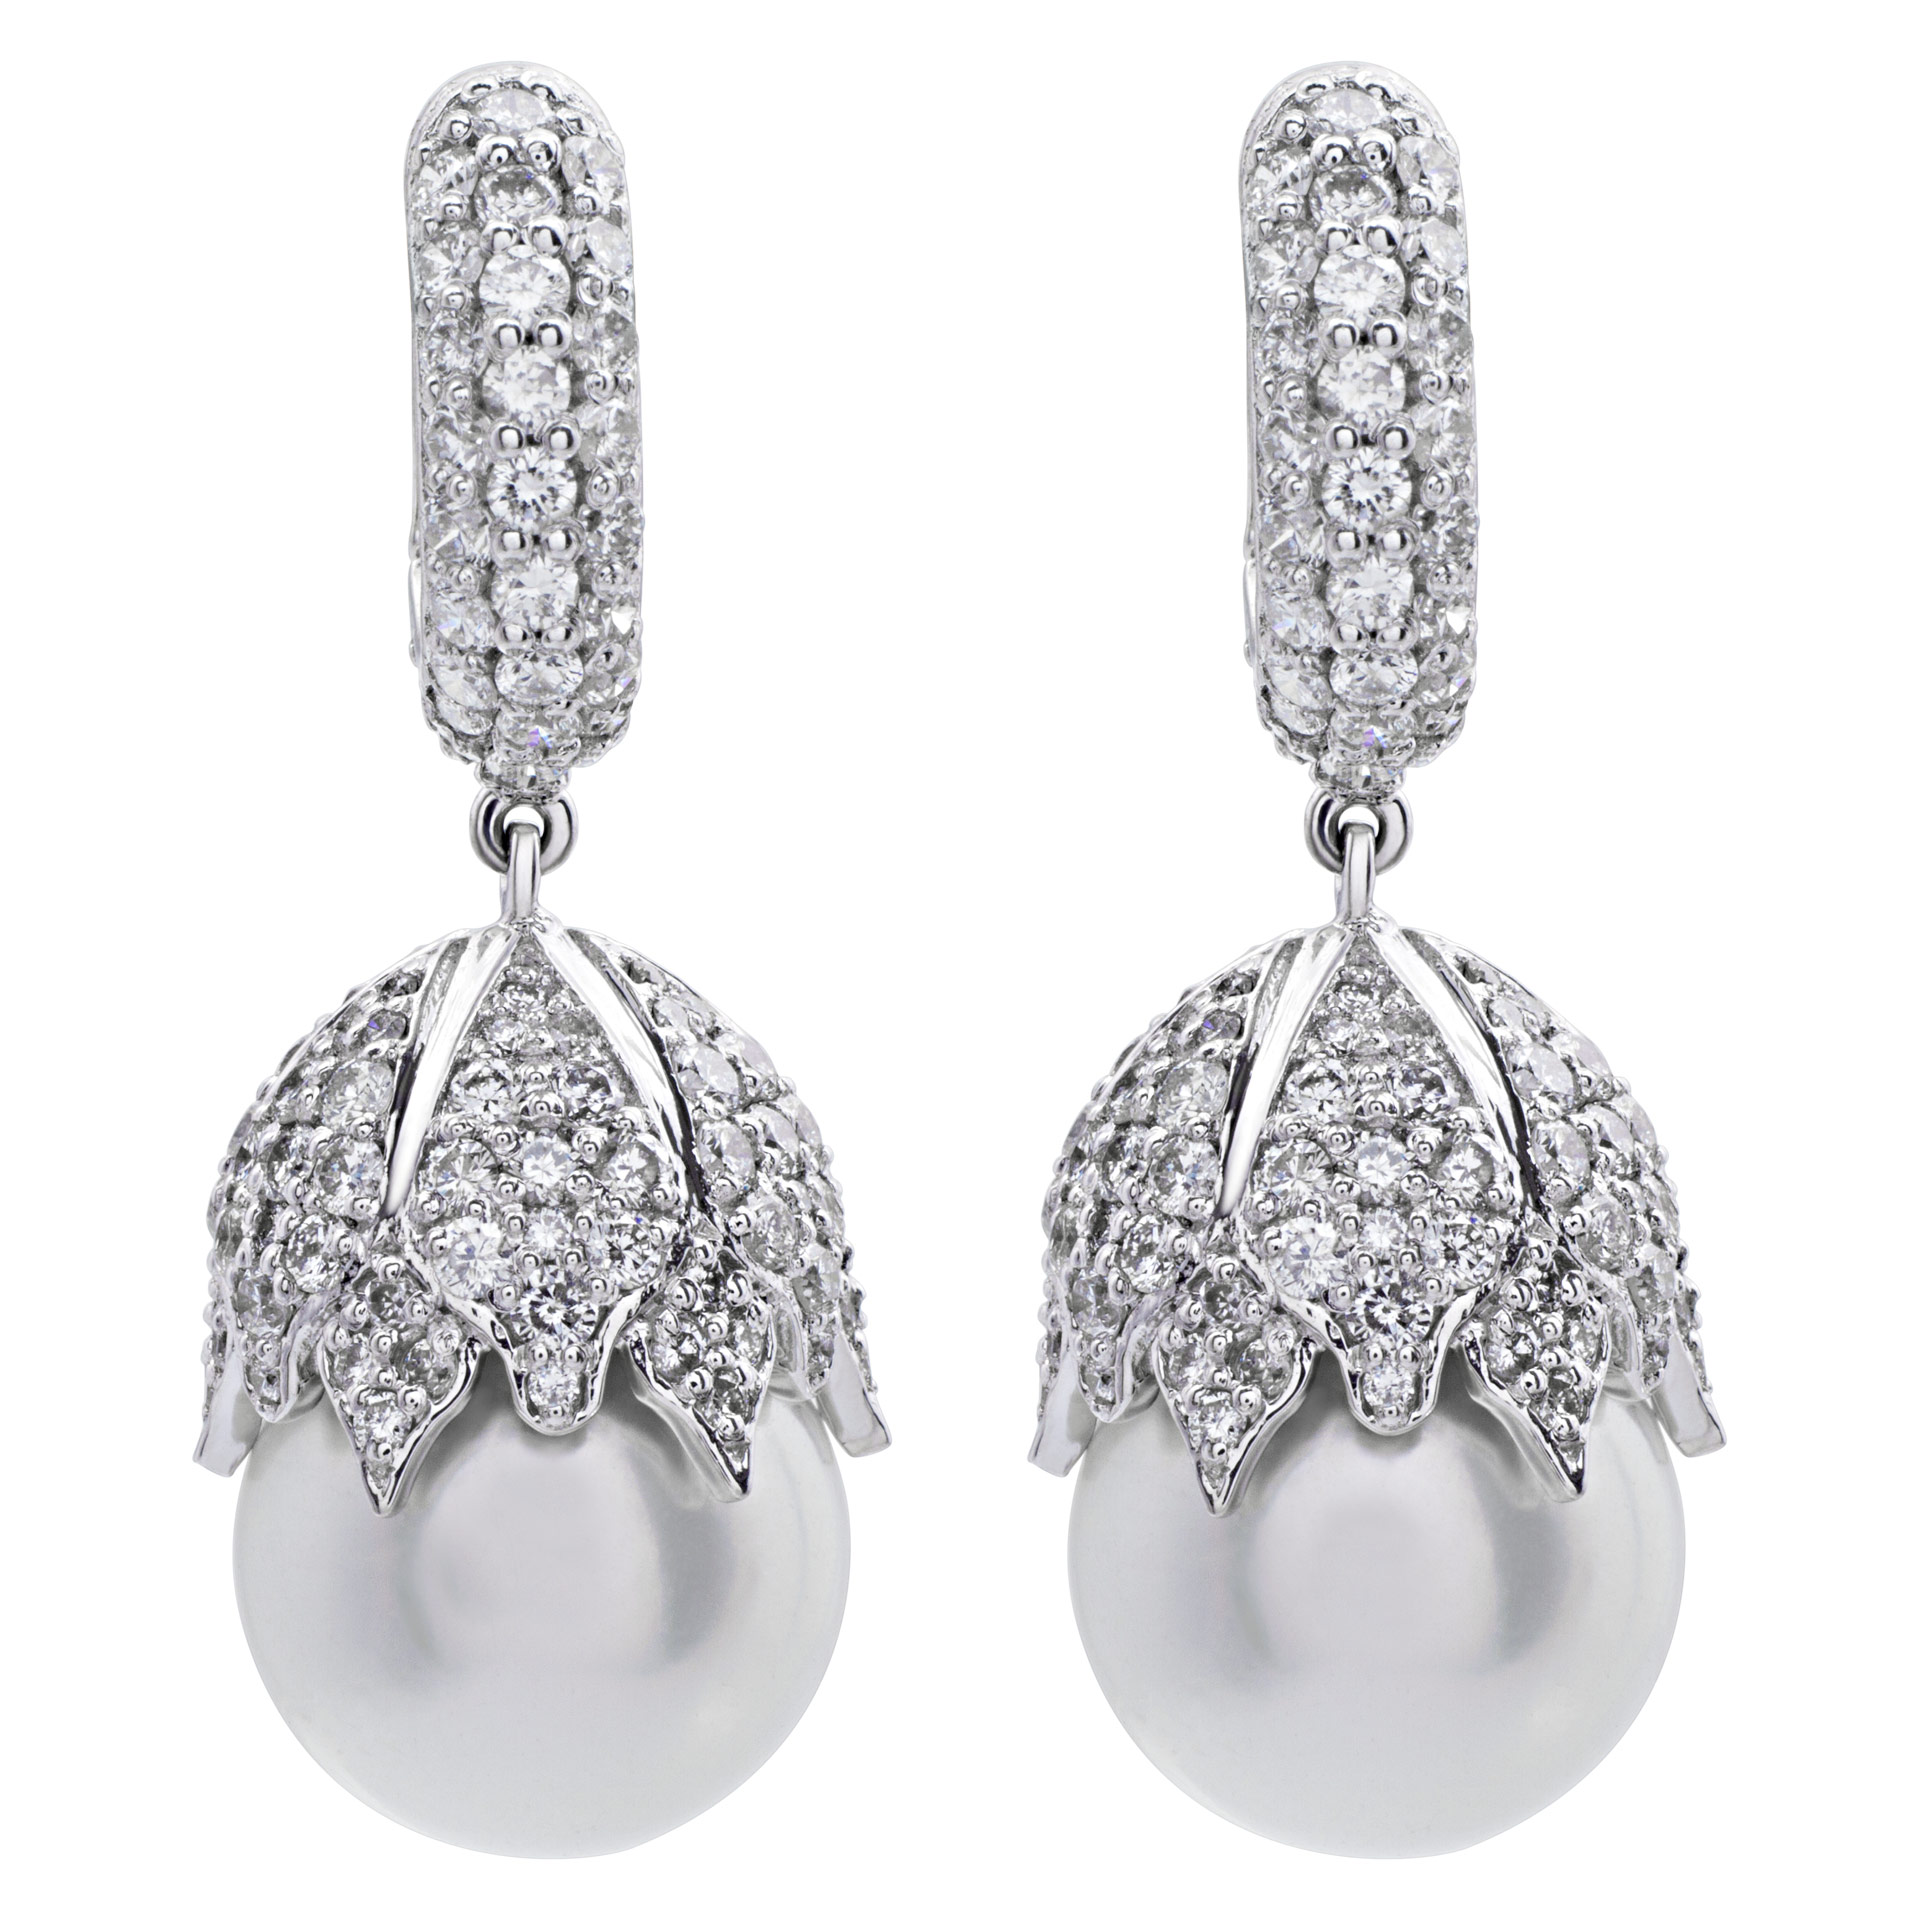 Elegant acorn shaped pearl earings with 4.82 carats in round cut diamonds set in 18k white gold